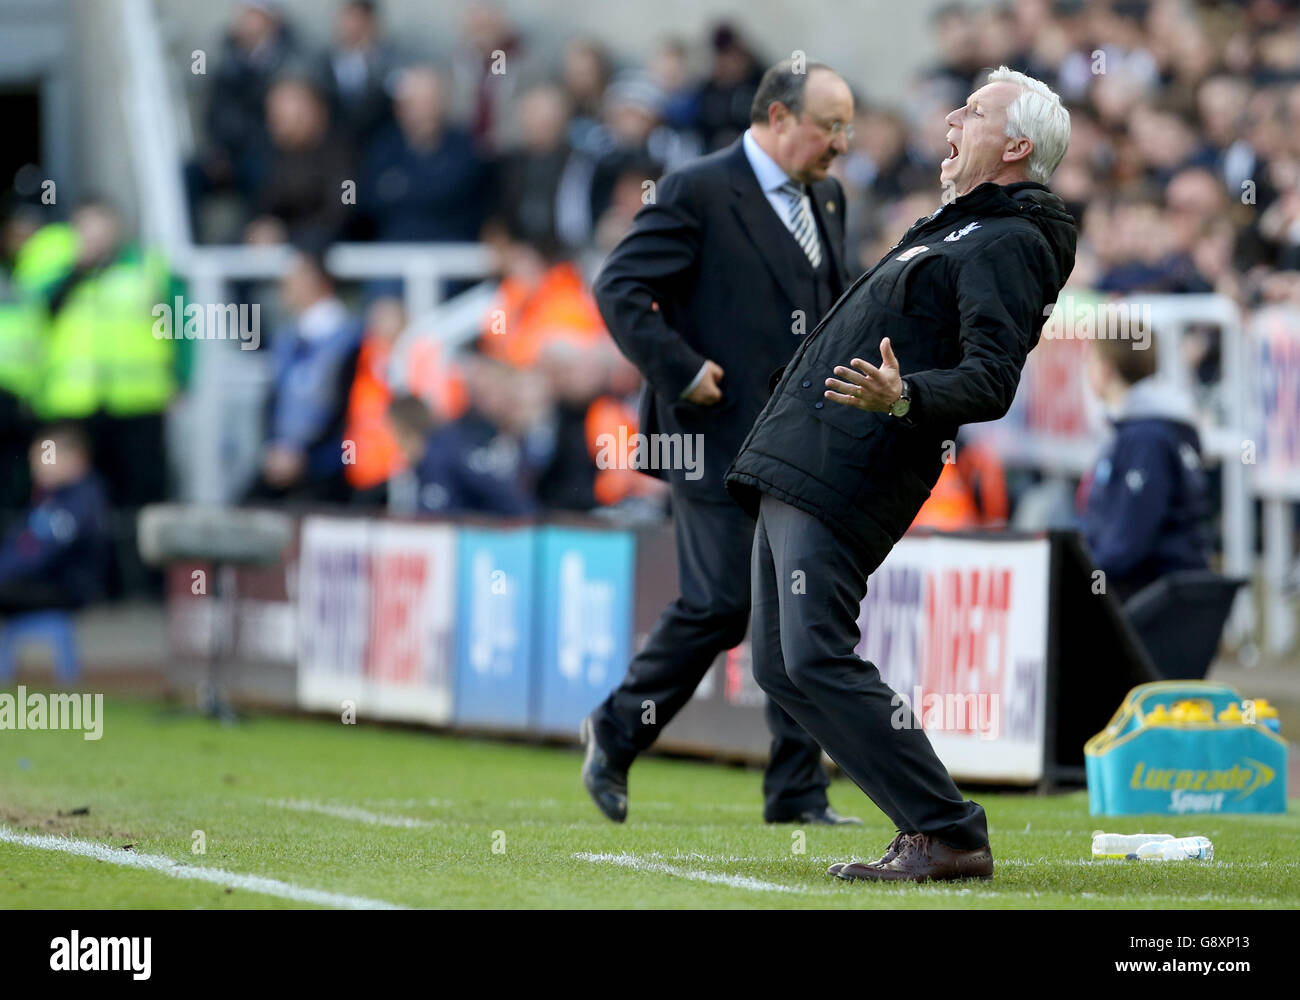 Newcastle United v Crystal Palace - Barclays Premier League - St James' Park. Crystal Palace manager Alan Pardew screams out during the Barclays Premier League match at St James' Park, Newcastle. Stock Photo